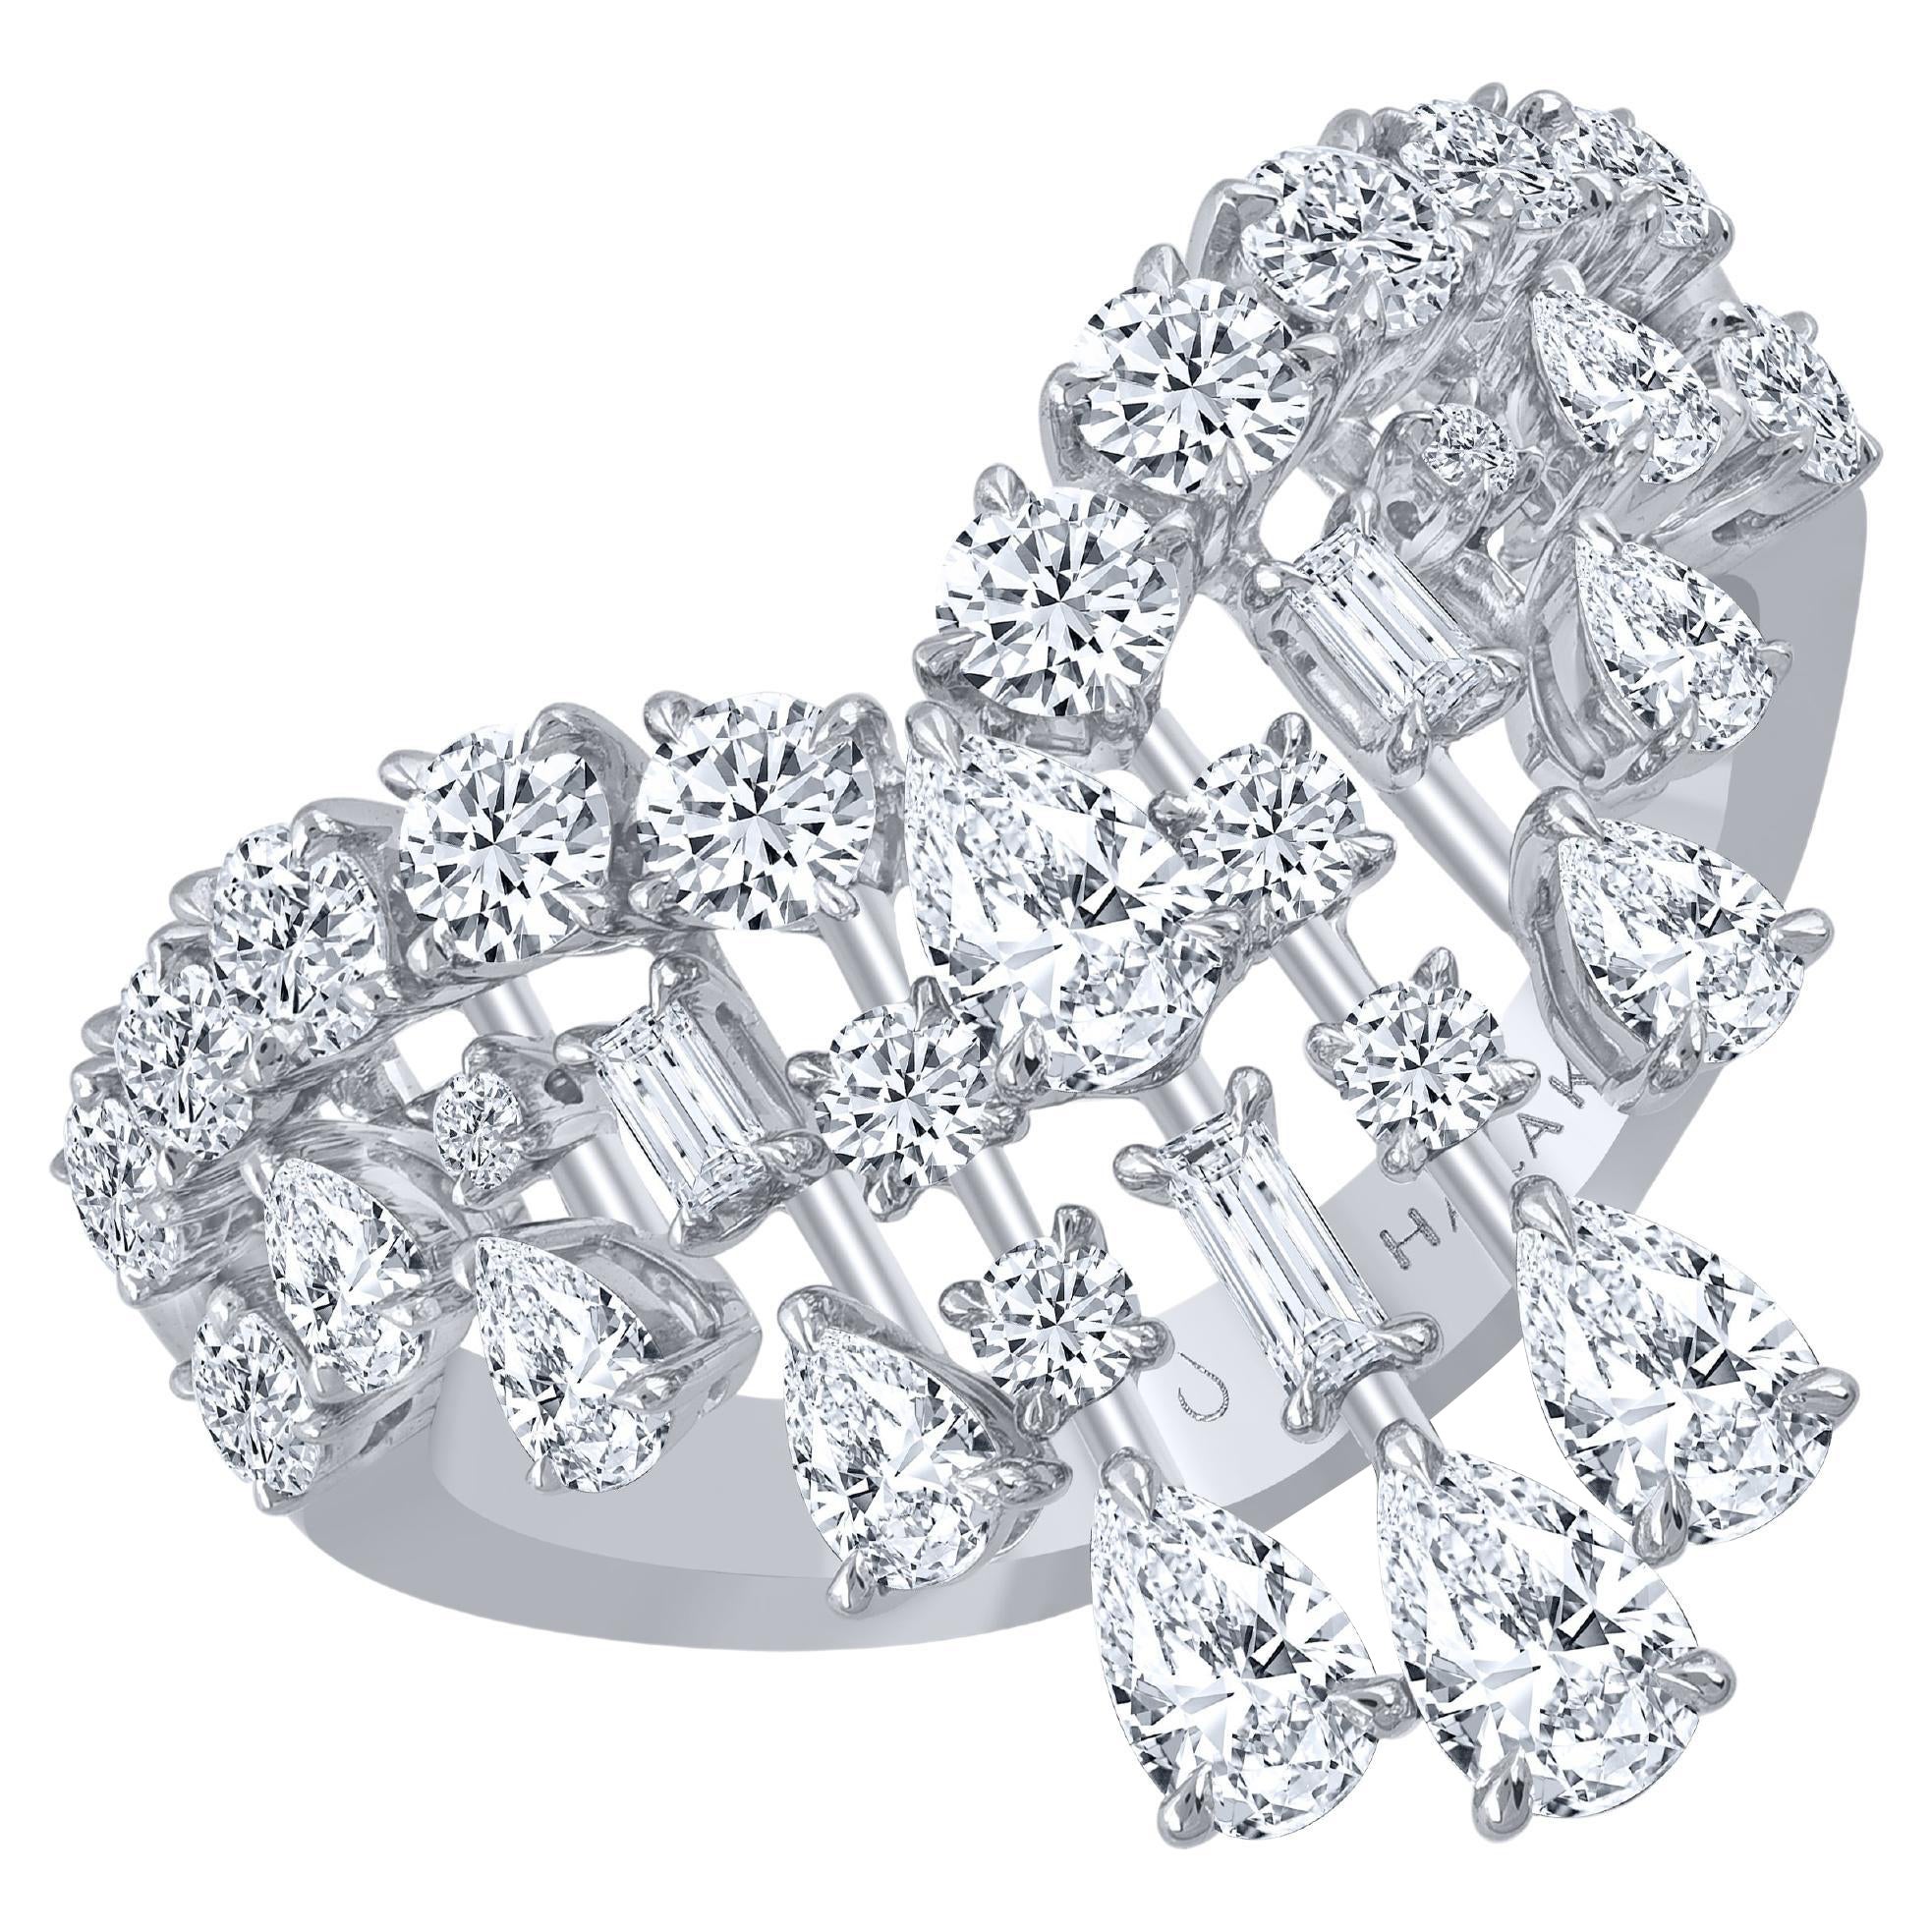 Harakh Colorless Diamond 1.65 Carat Cluster Ring in 18 Kt White Gold For Sale